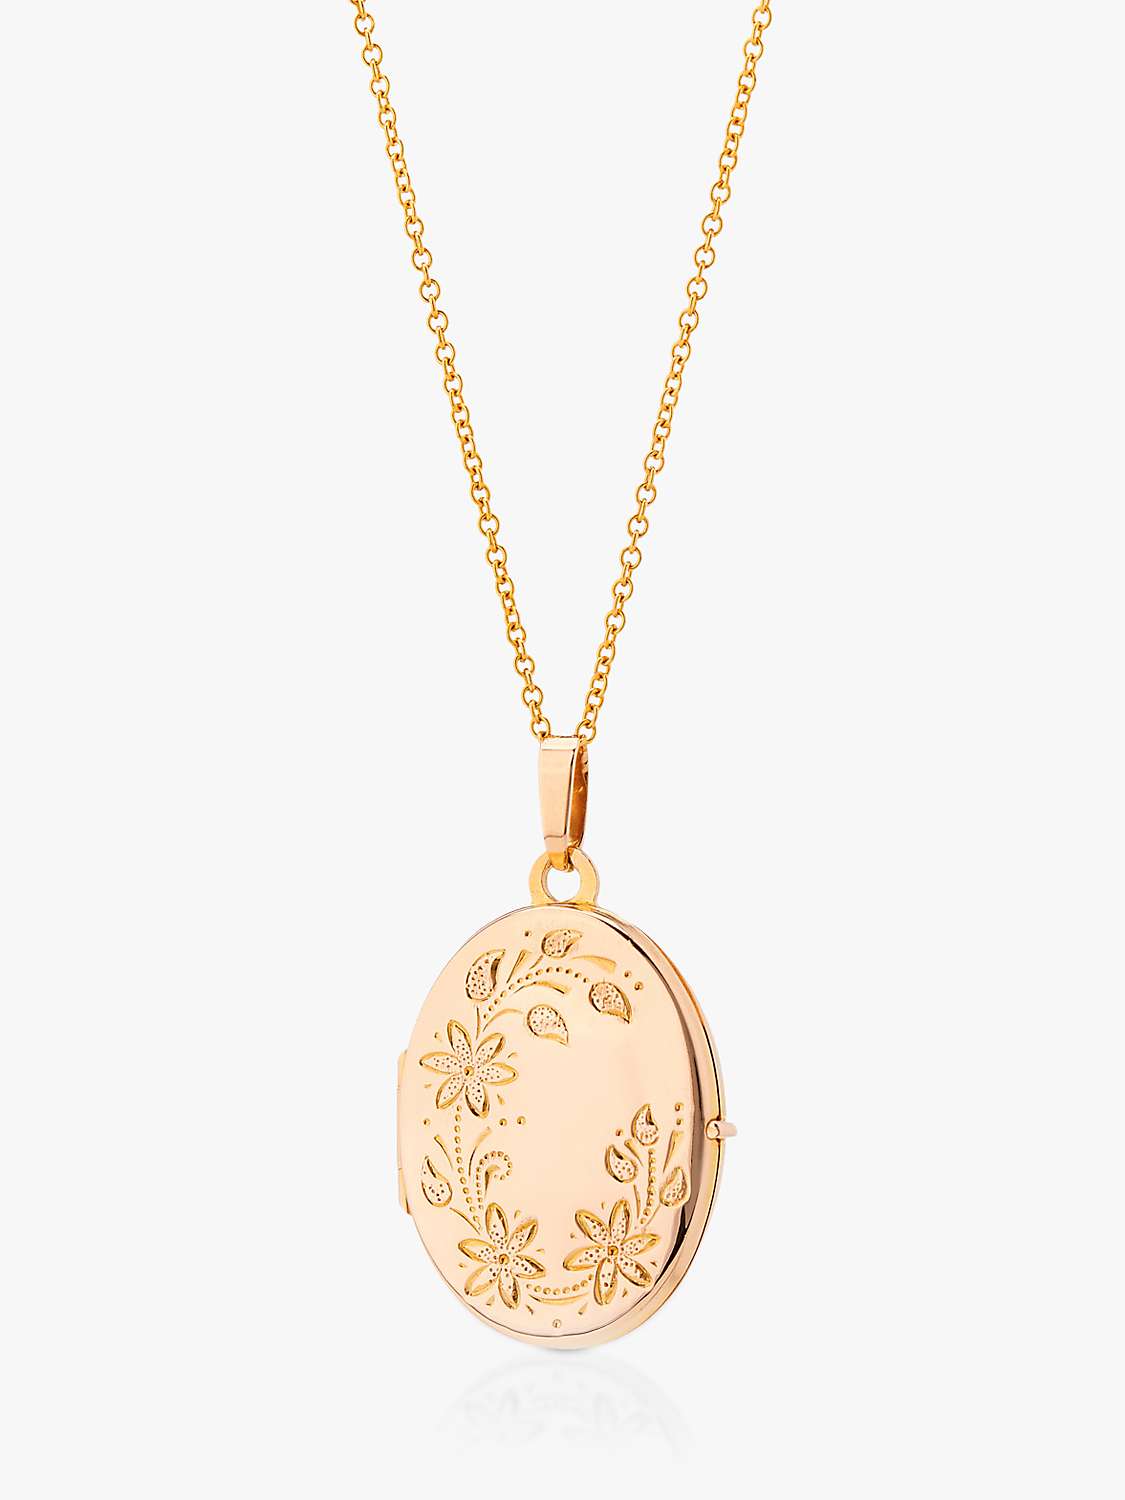 Buy L & T Heirlooms 9ct Yellow Gold Second Hand Floral Locket Pendant Necklace Online at johnlewis.com